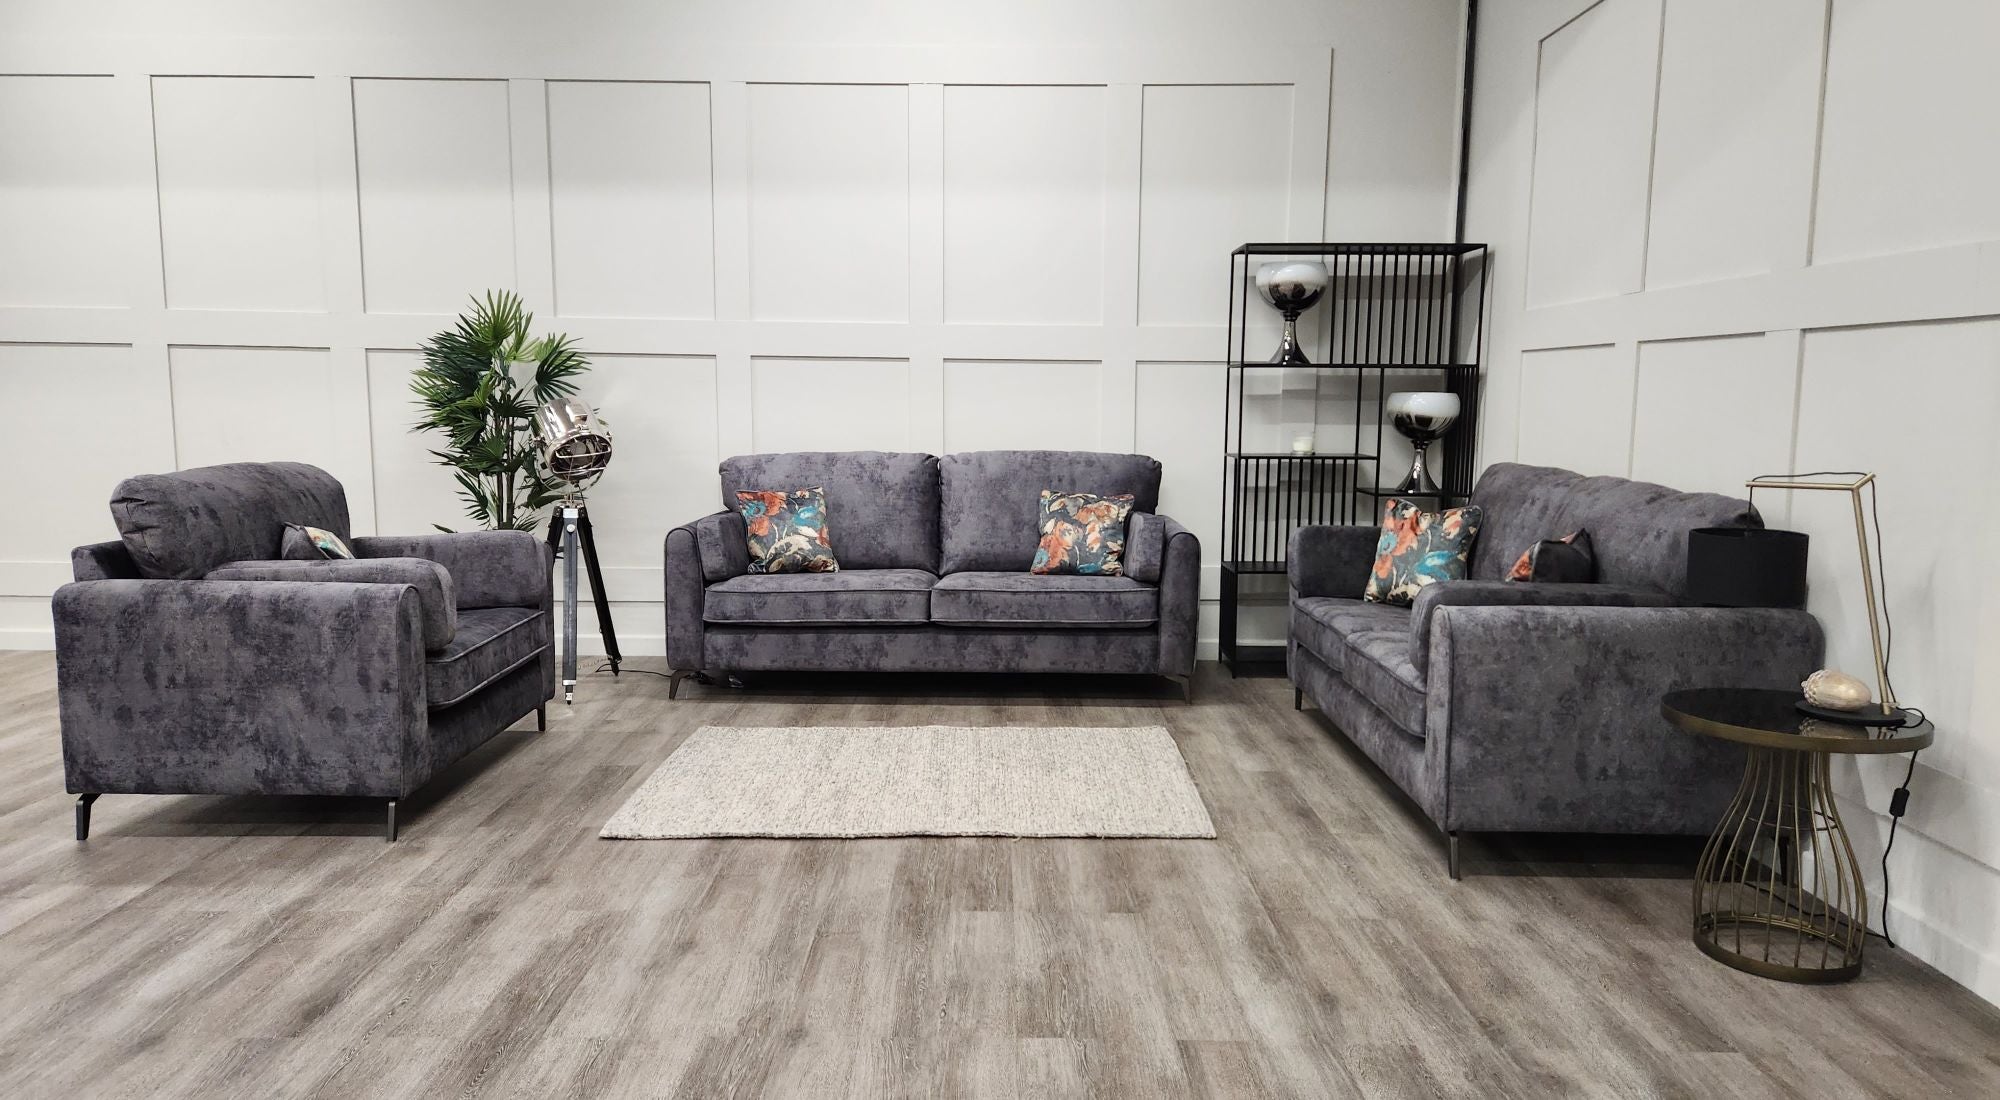 Grey sofa set 3 seater 2 seater and love chair in a room setting